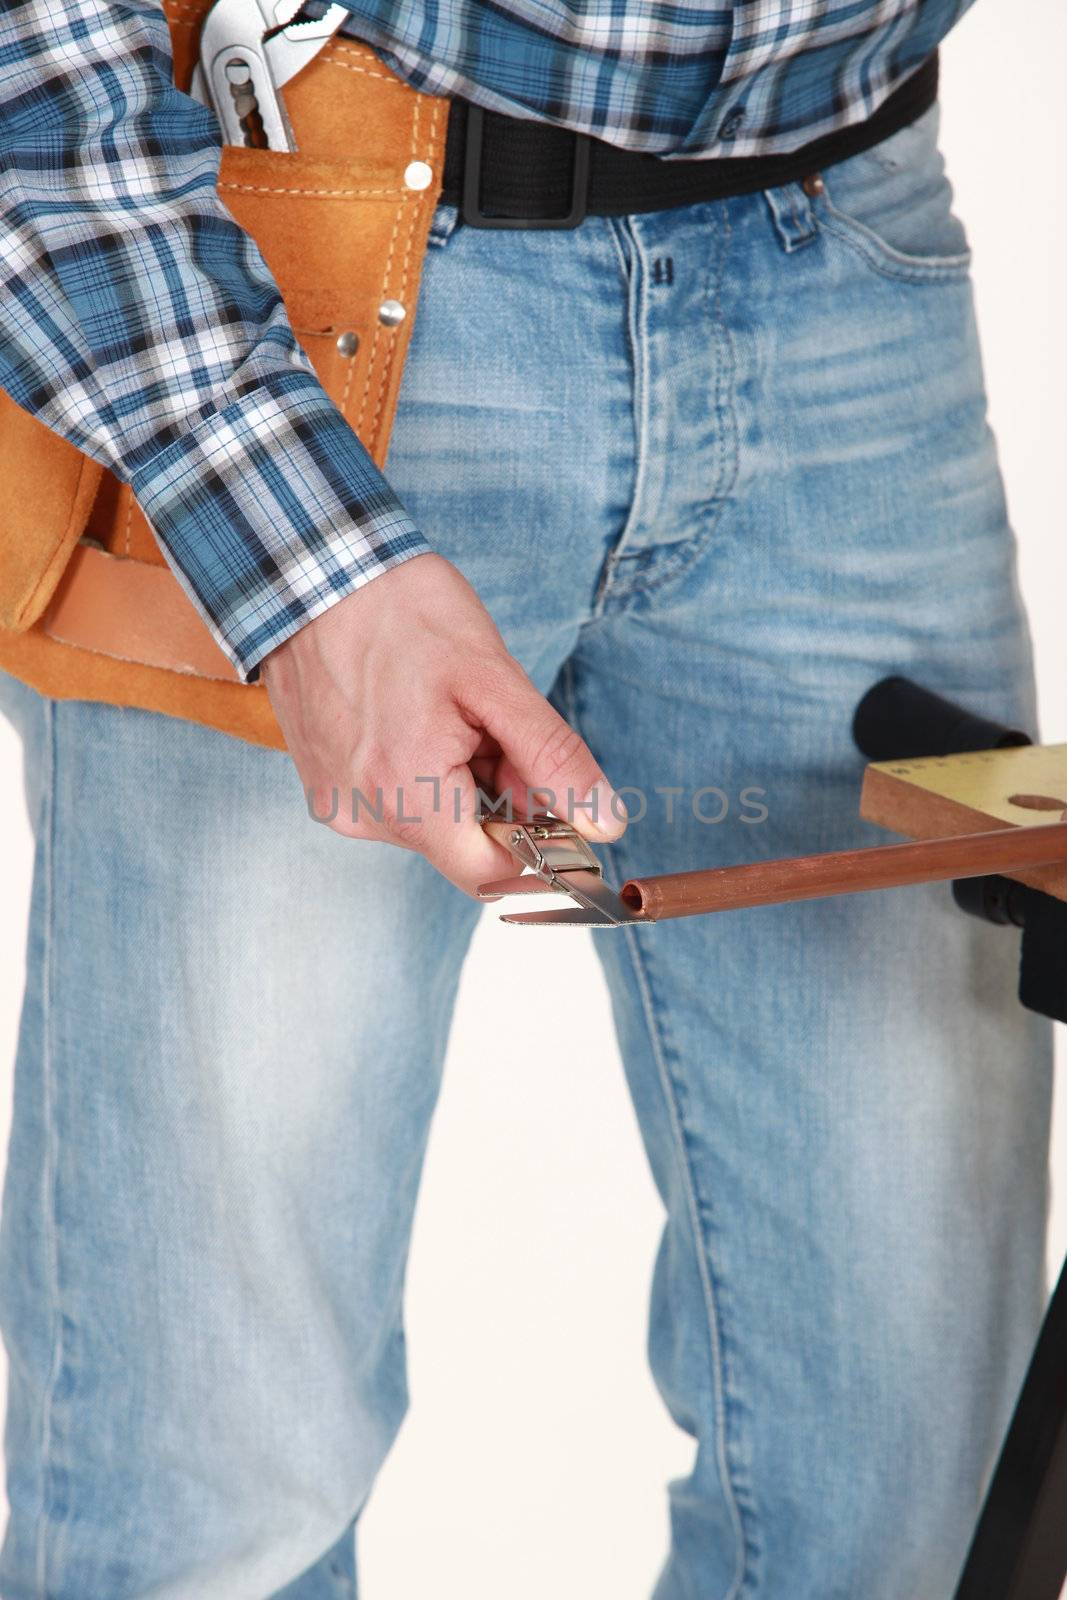 Tradesman using a vernier scale to measure a copper tube by phovoir